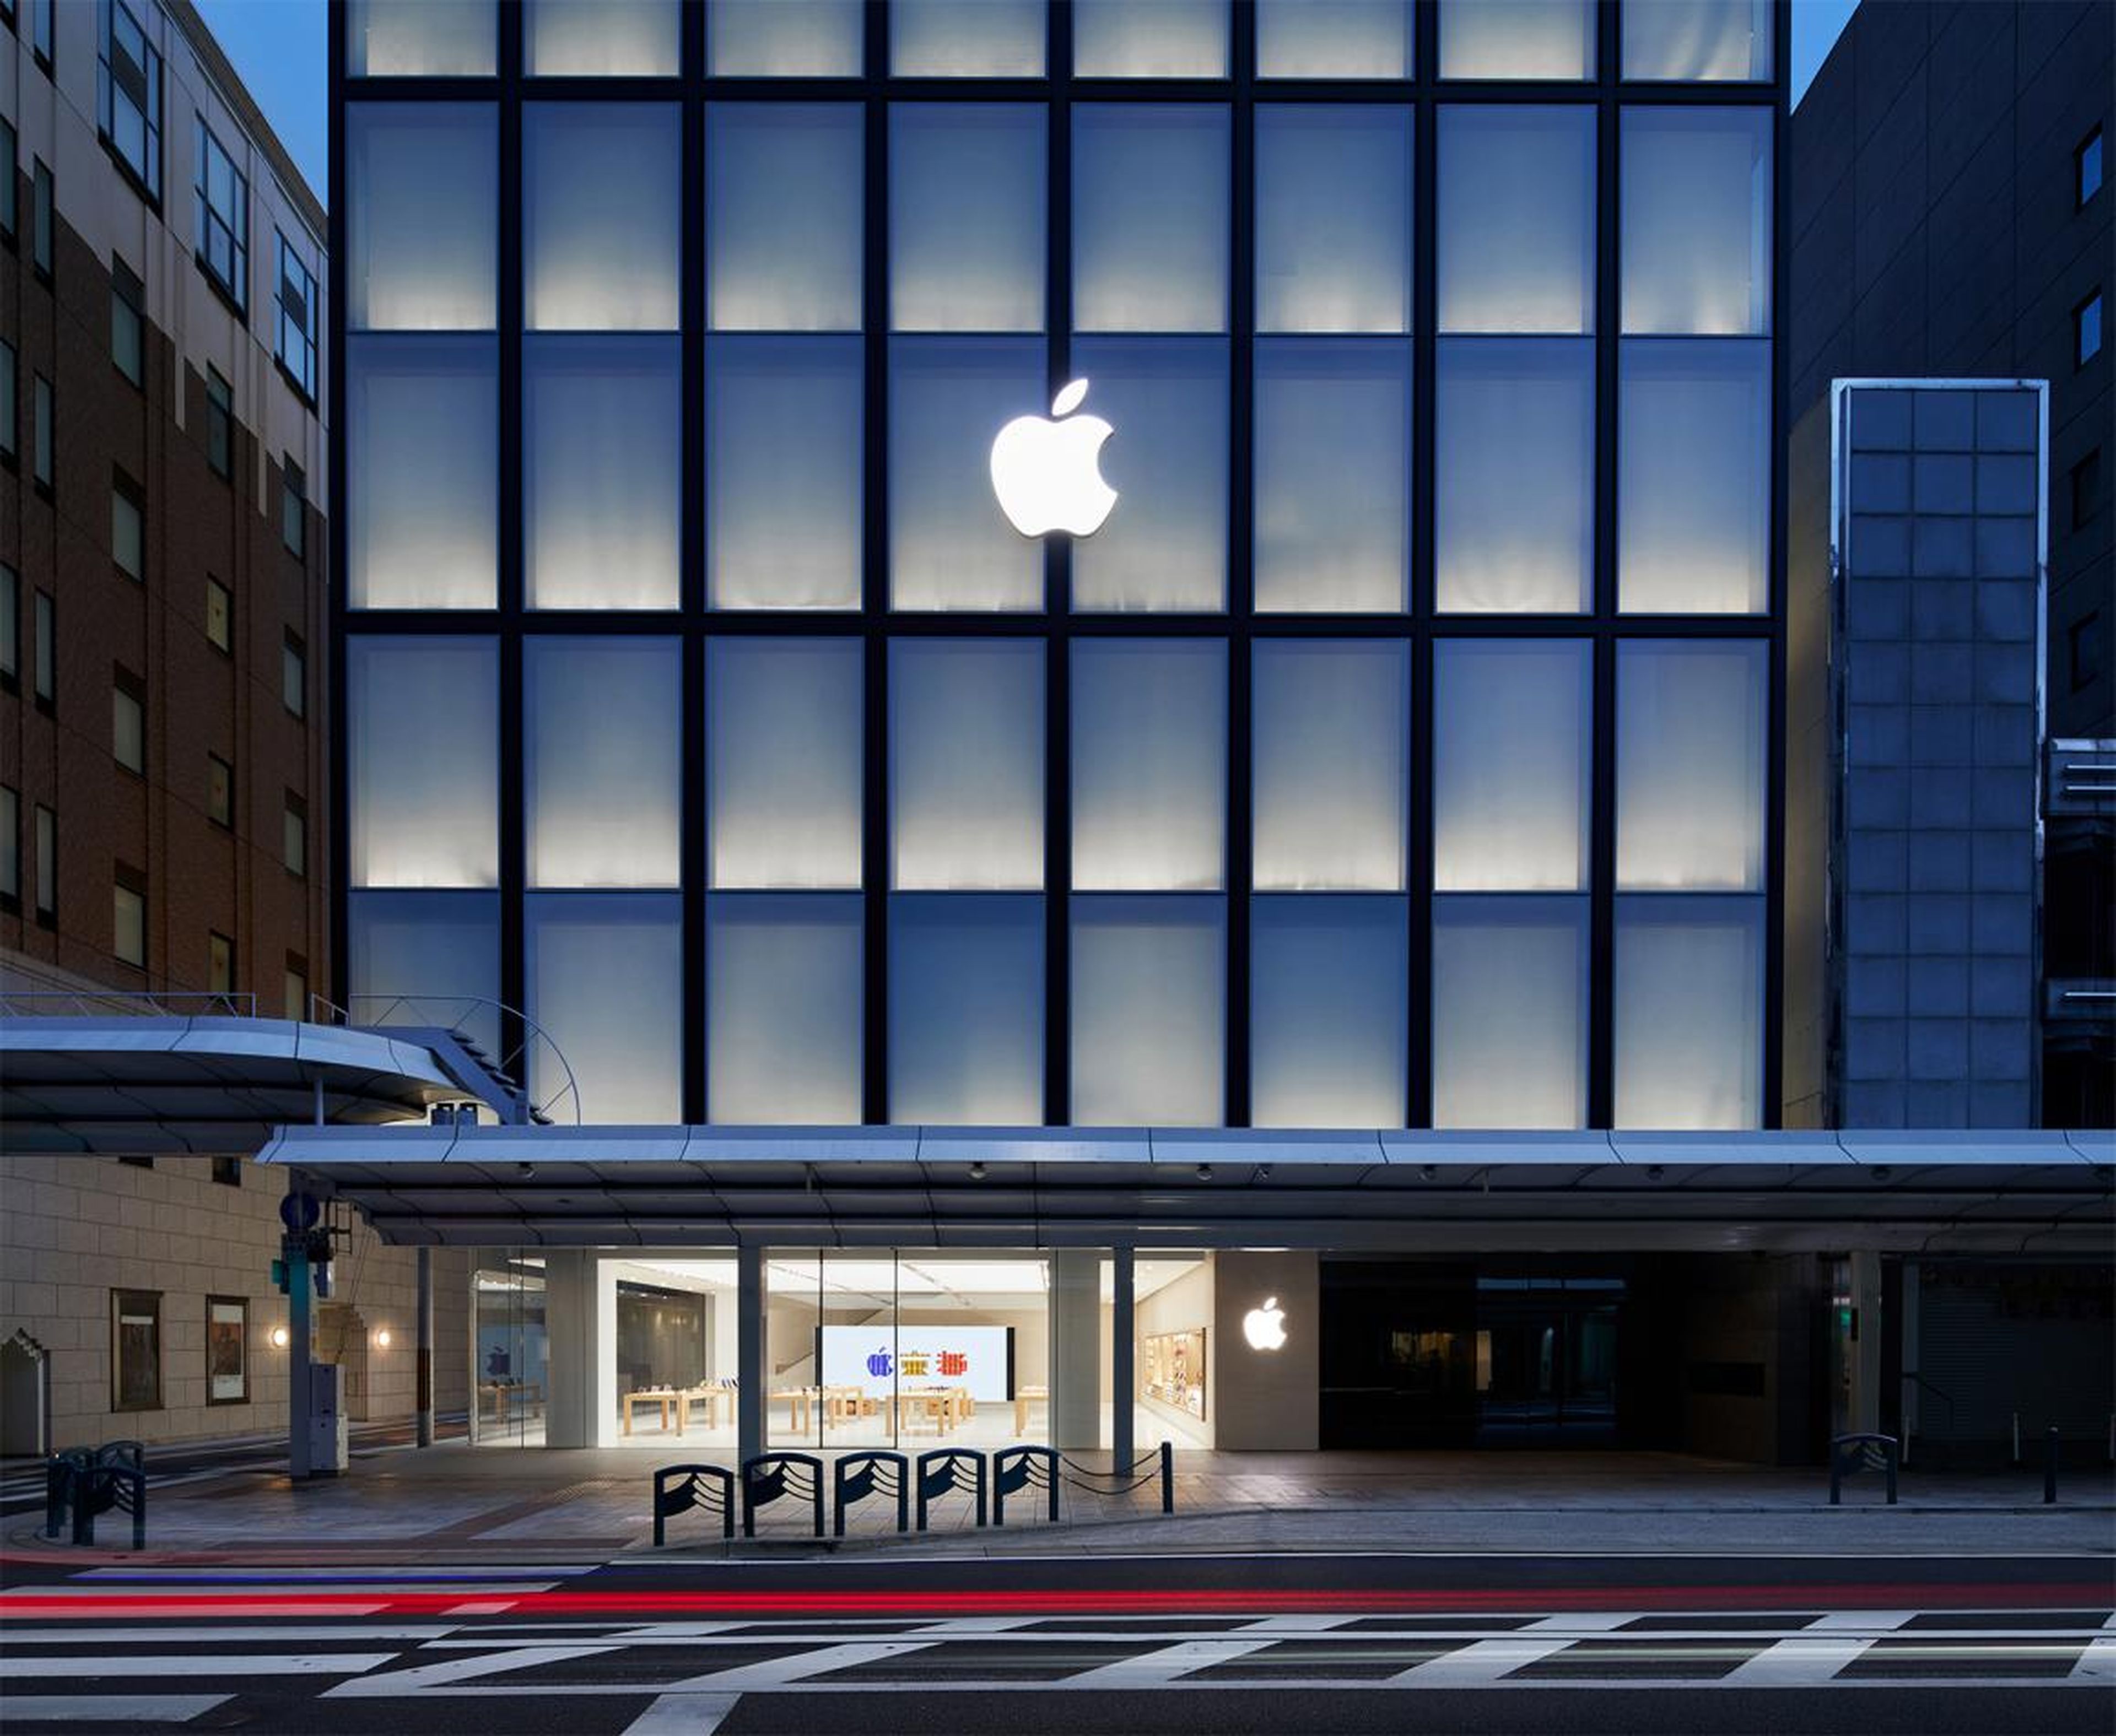 Apple opened its first store in Kyoto, Japan, last summer on Shijō Dori, the city's main technological and retail hub since the 1600s.